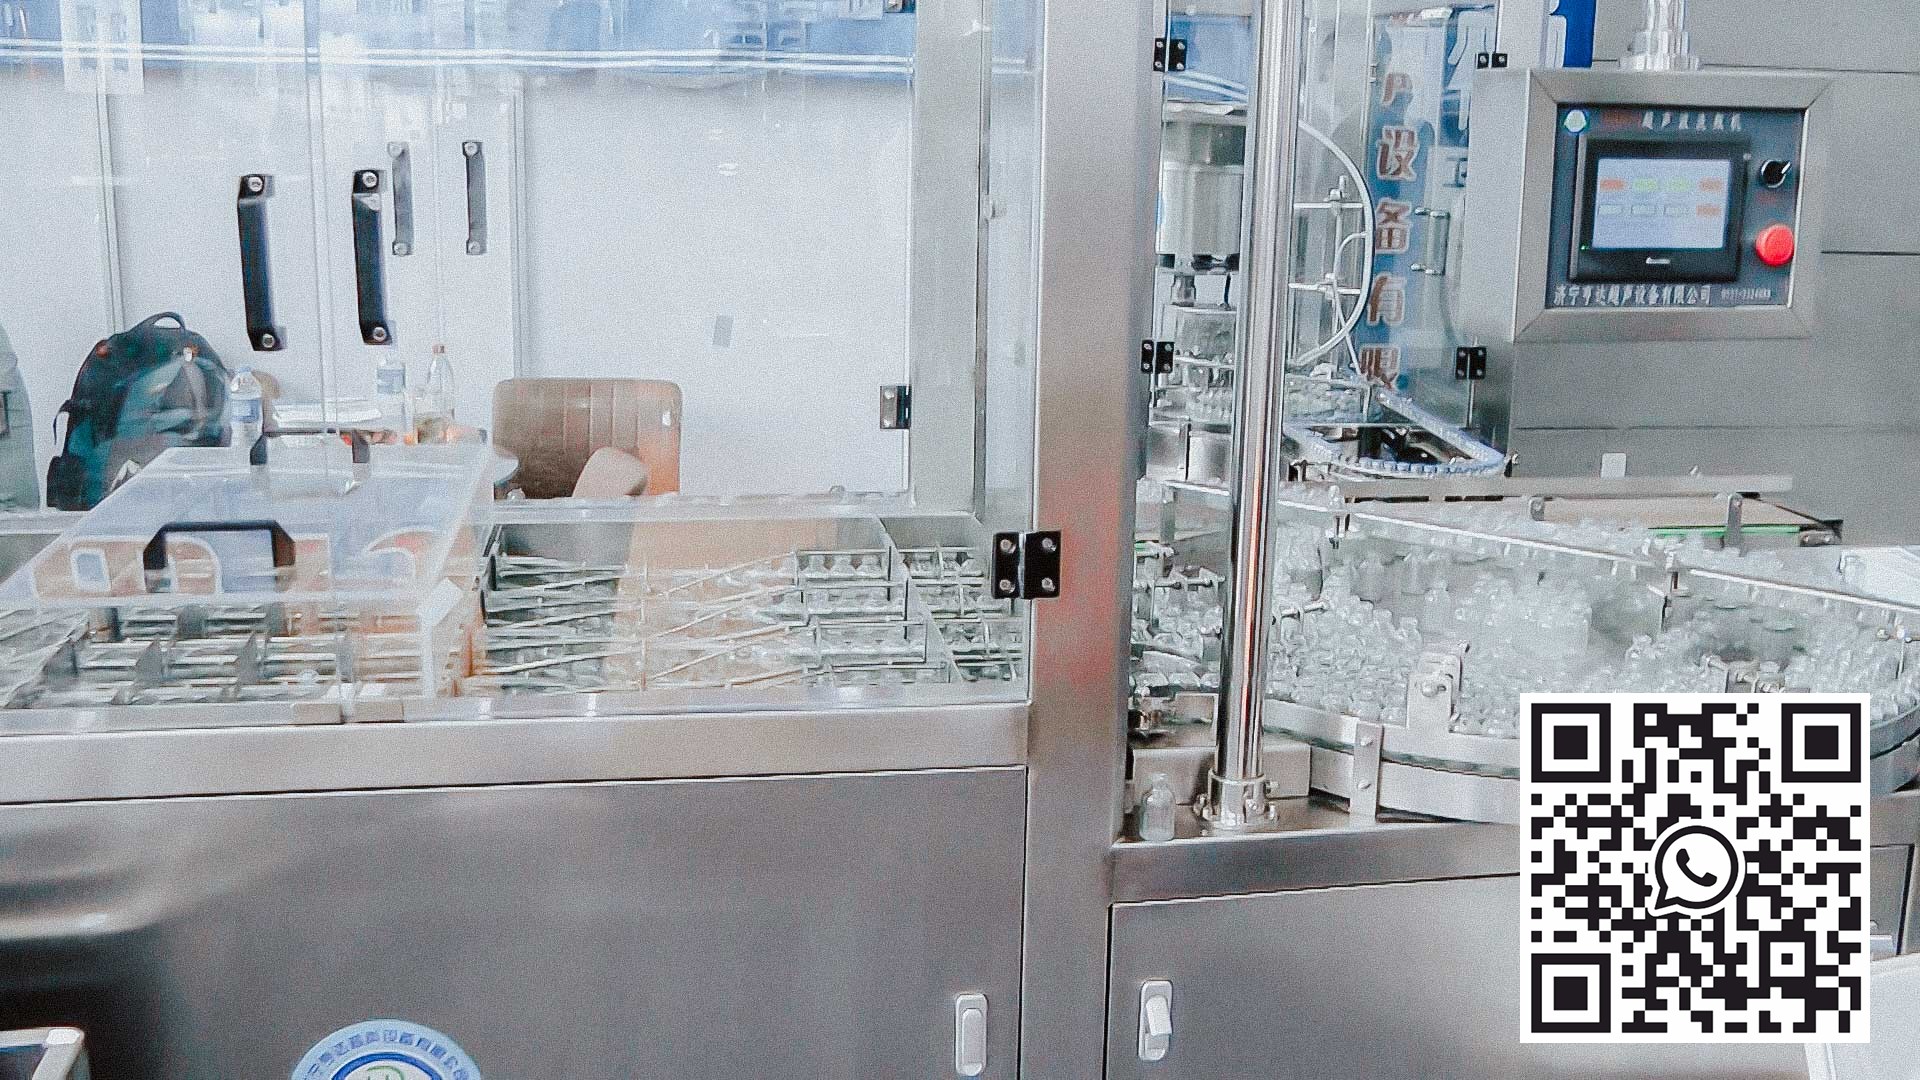 Automatic machine for washing and sterilizing glass penicillin bottles